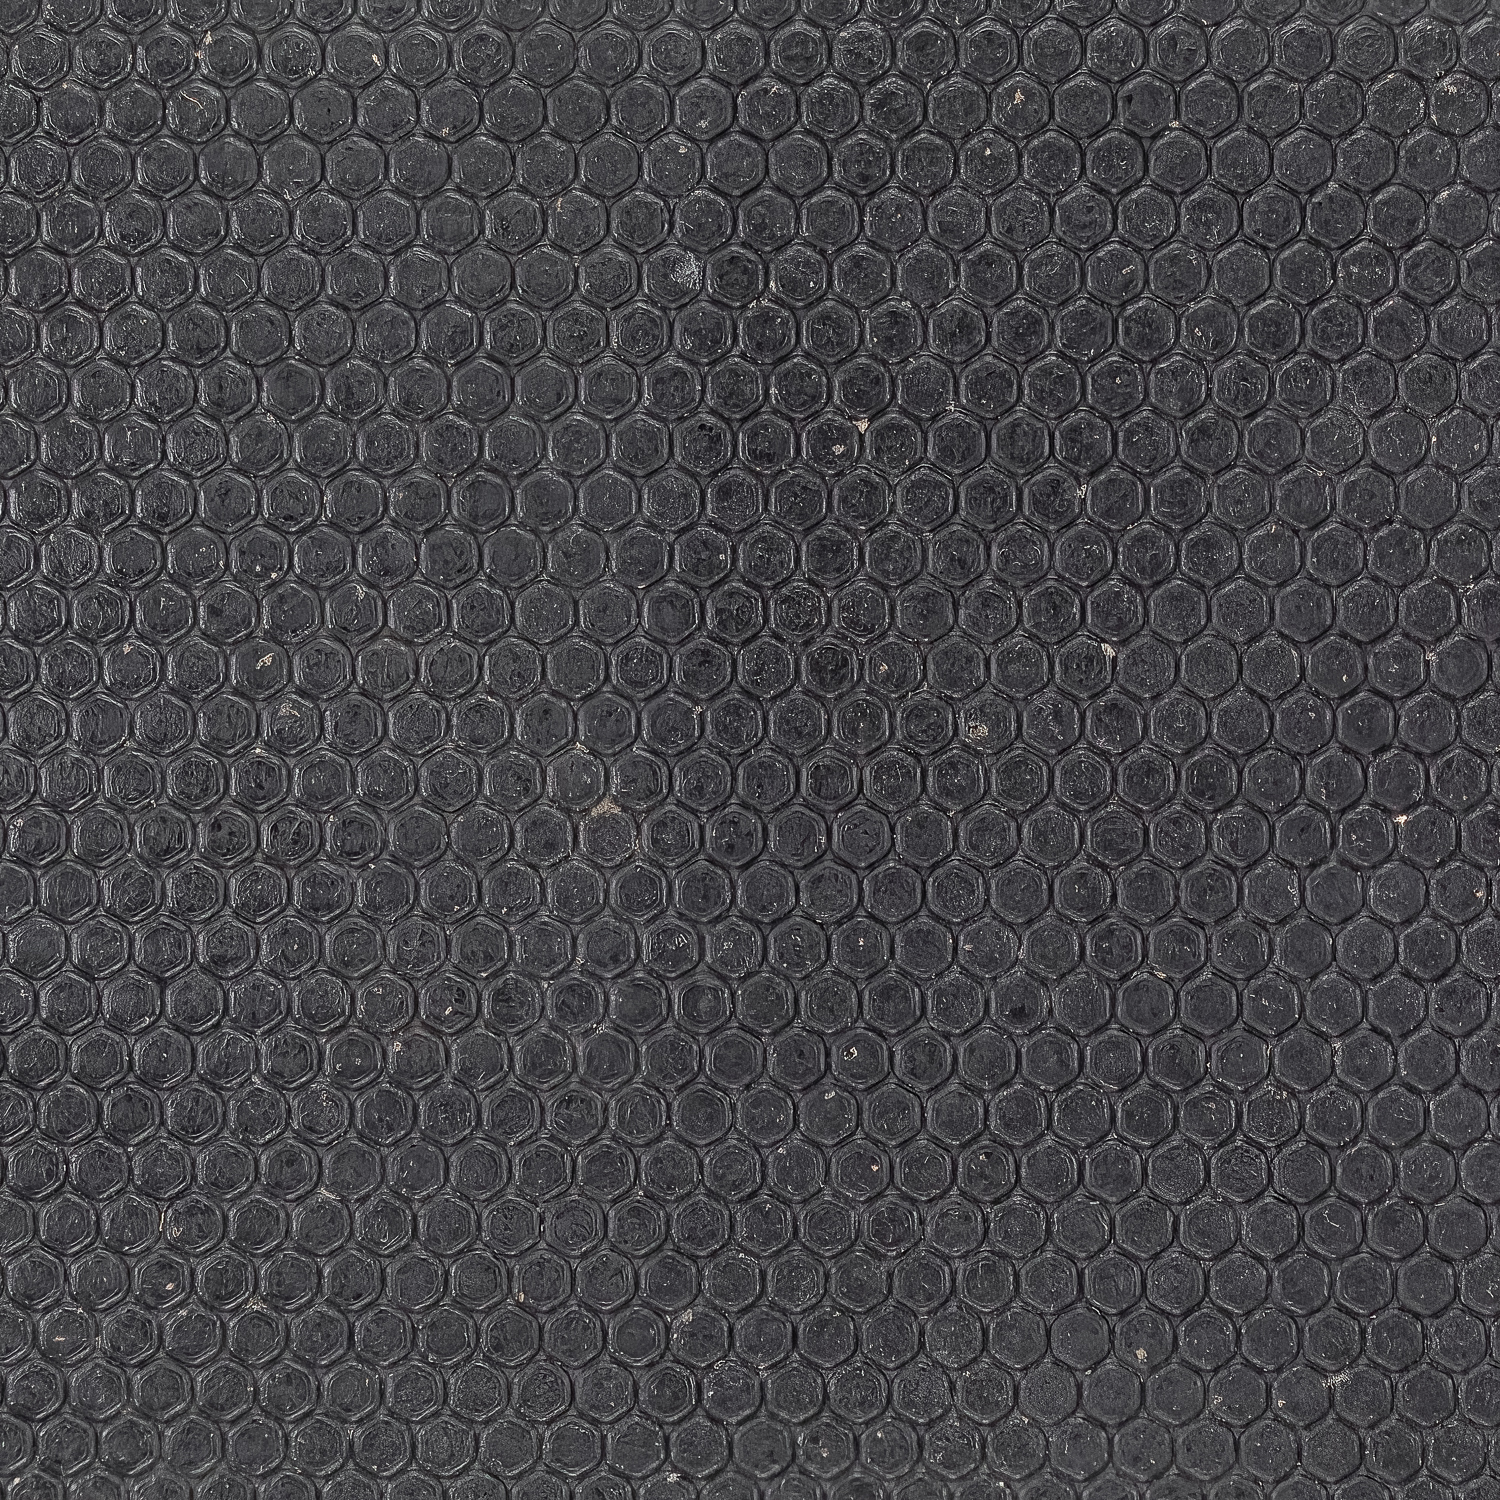 Horse Stall Mat Kit 14x14 Ft x 3/4 In Black Top black swatch.